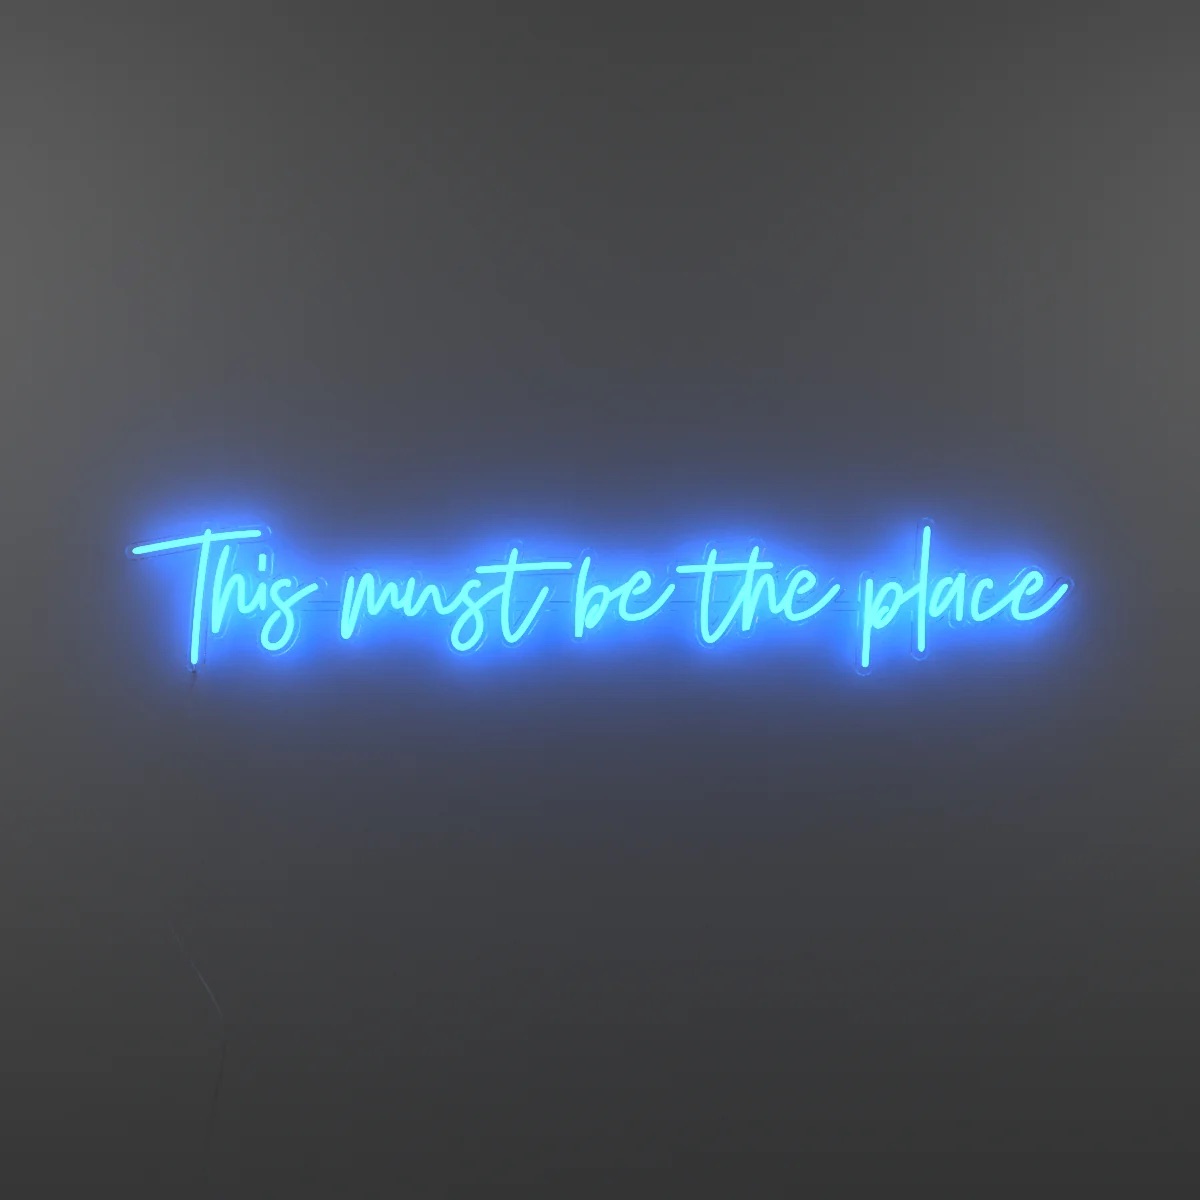 Neon light with text "This must be the place" in blue from Yellowpop